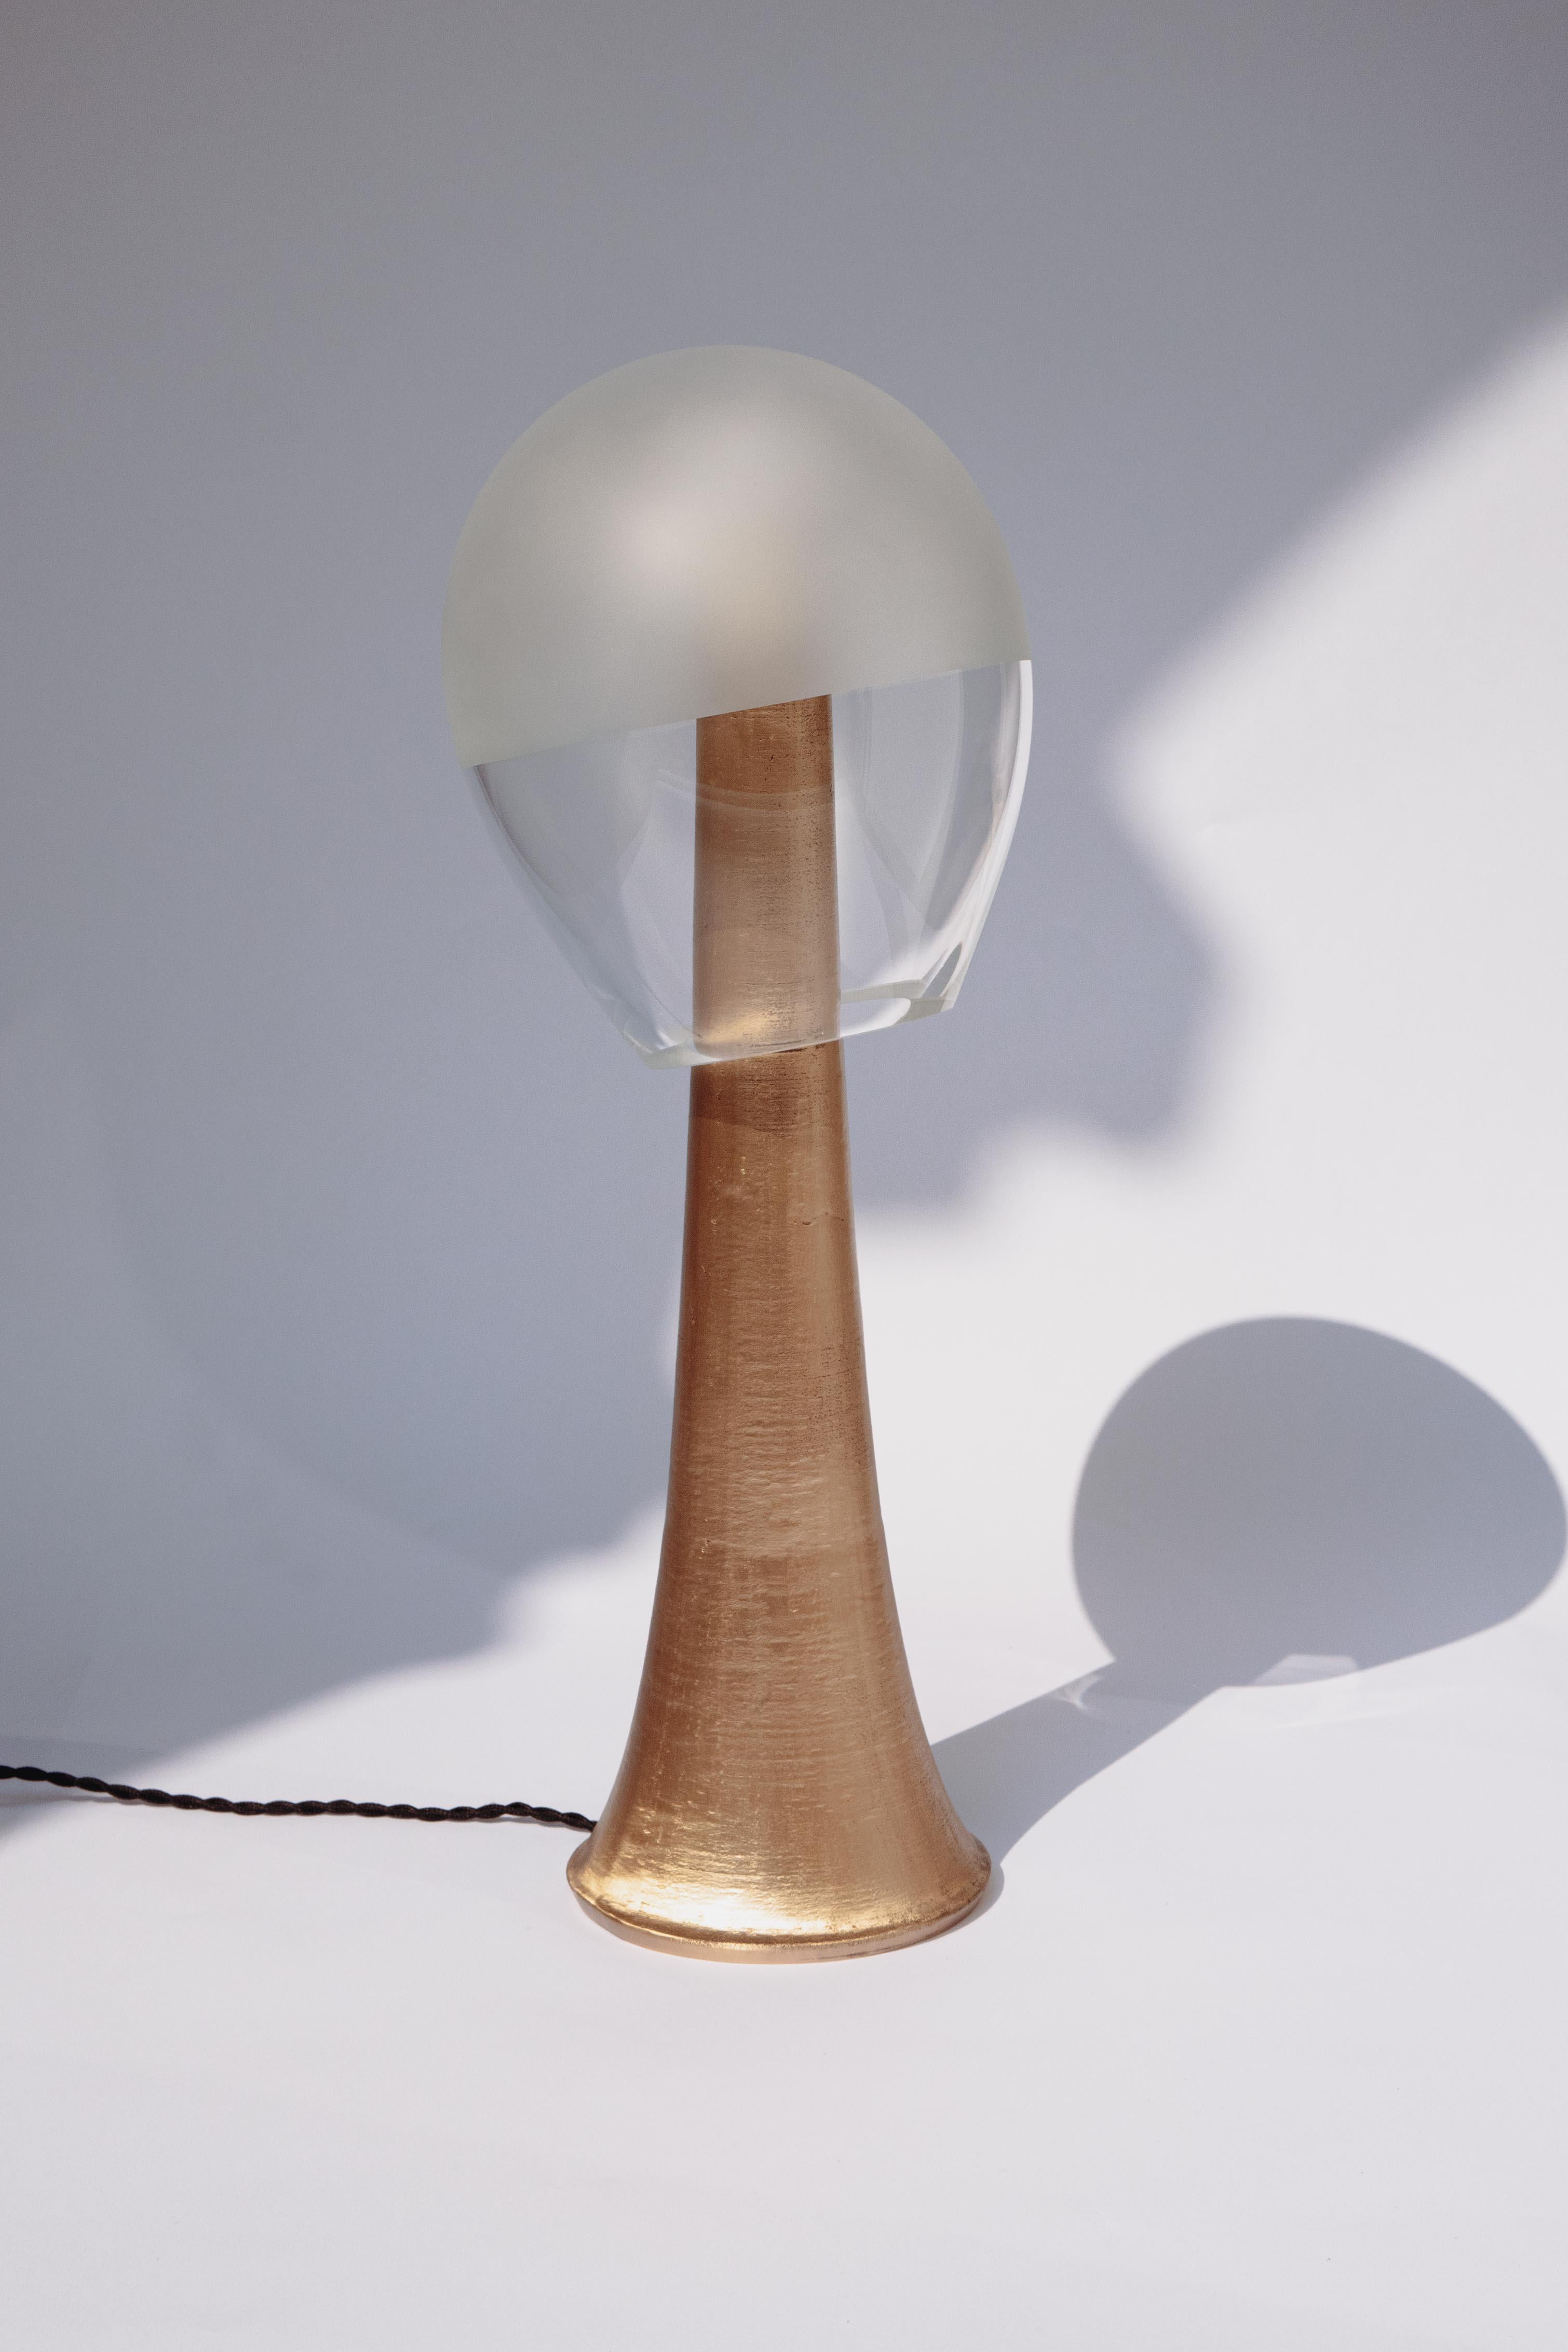 Mangaba Table Lamp by Clément Thevenot
Limited Edition Of 12 Pieces.
Designed by Clément Thevenot and Joyce Broussillou.
Dimensions: D 20 x W 20 x H 60 cm.
Materials: Nailed bronze, sandblasted glass, heat-resistant plastic diffuser system, driver